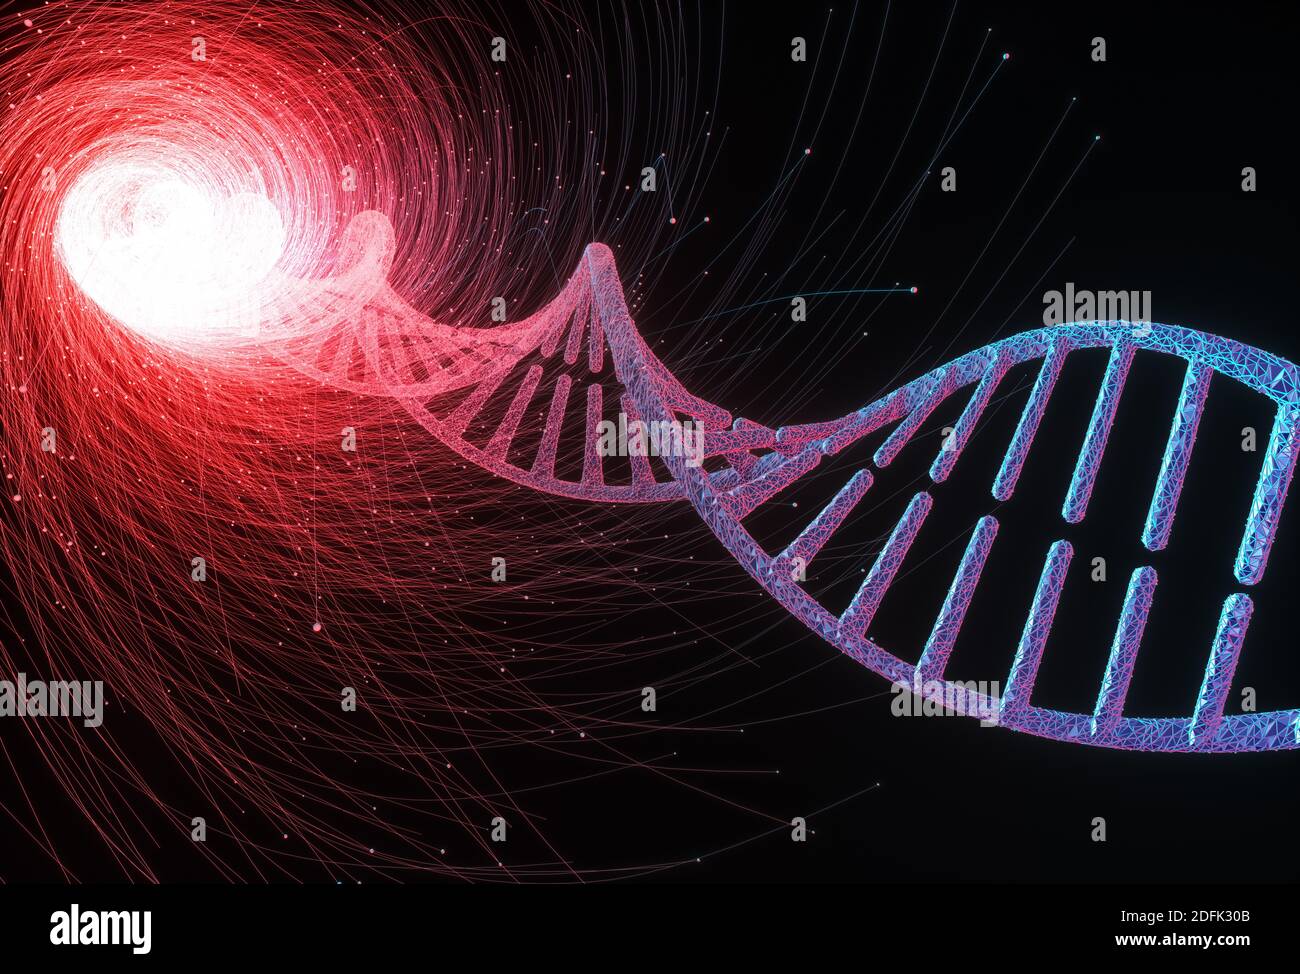 DNA research, conceptual illustration Stock Photo